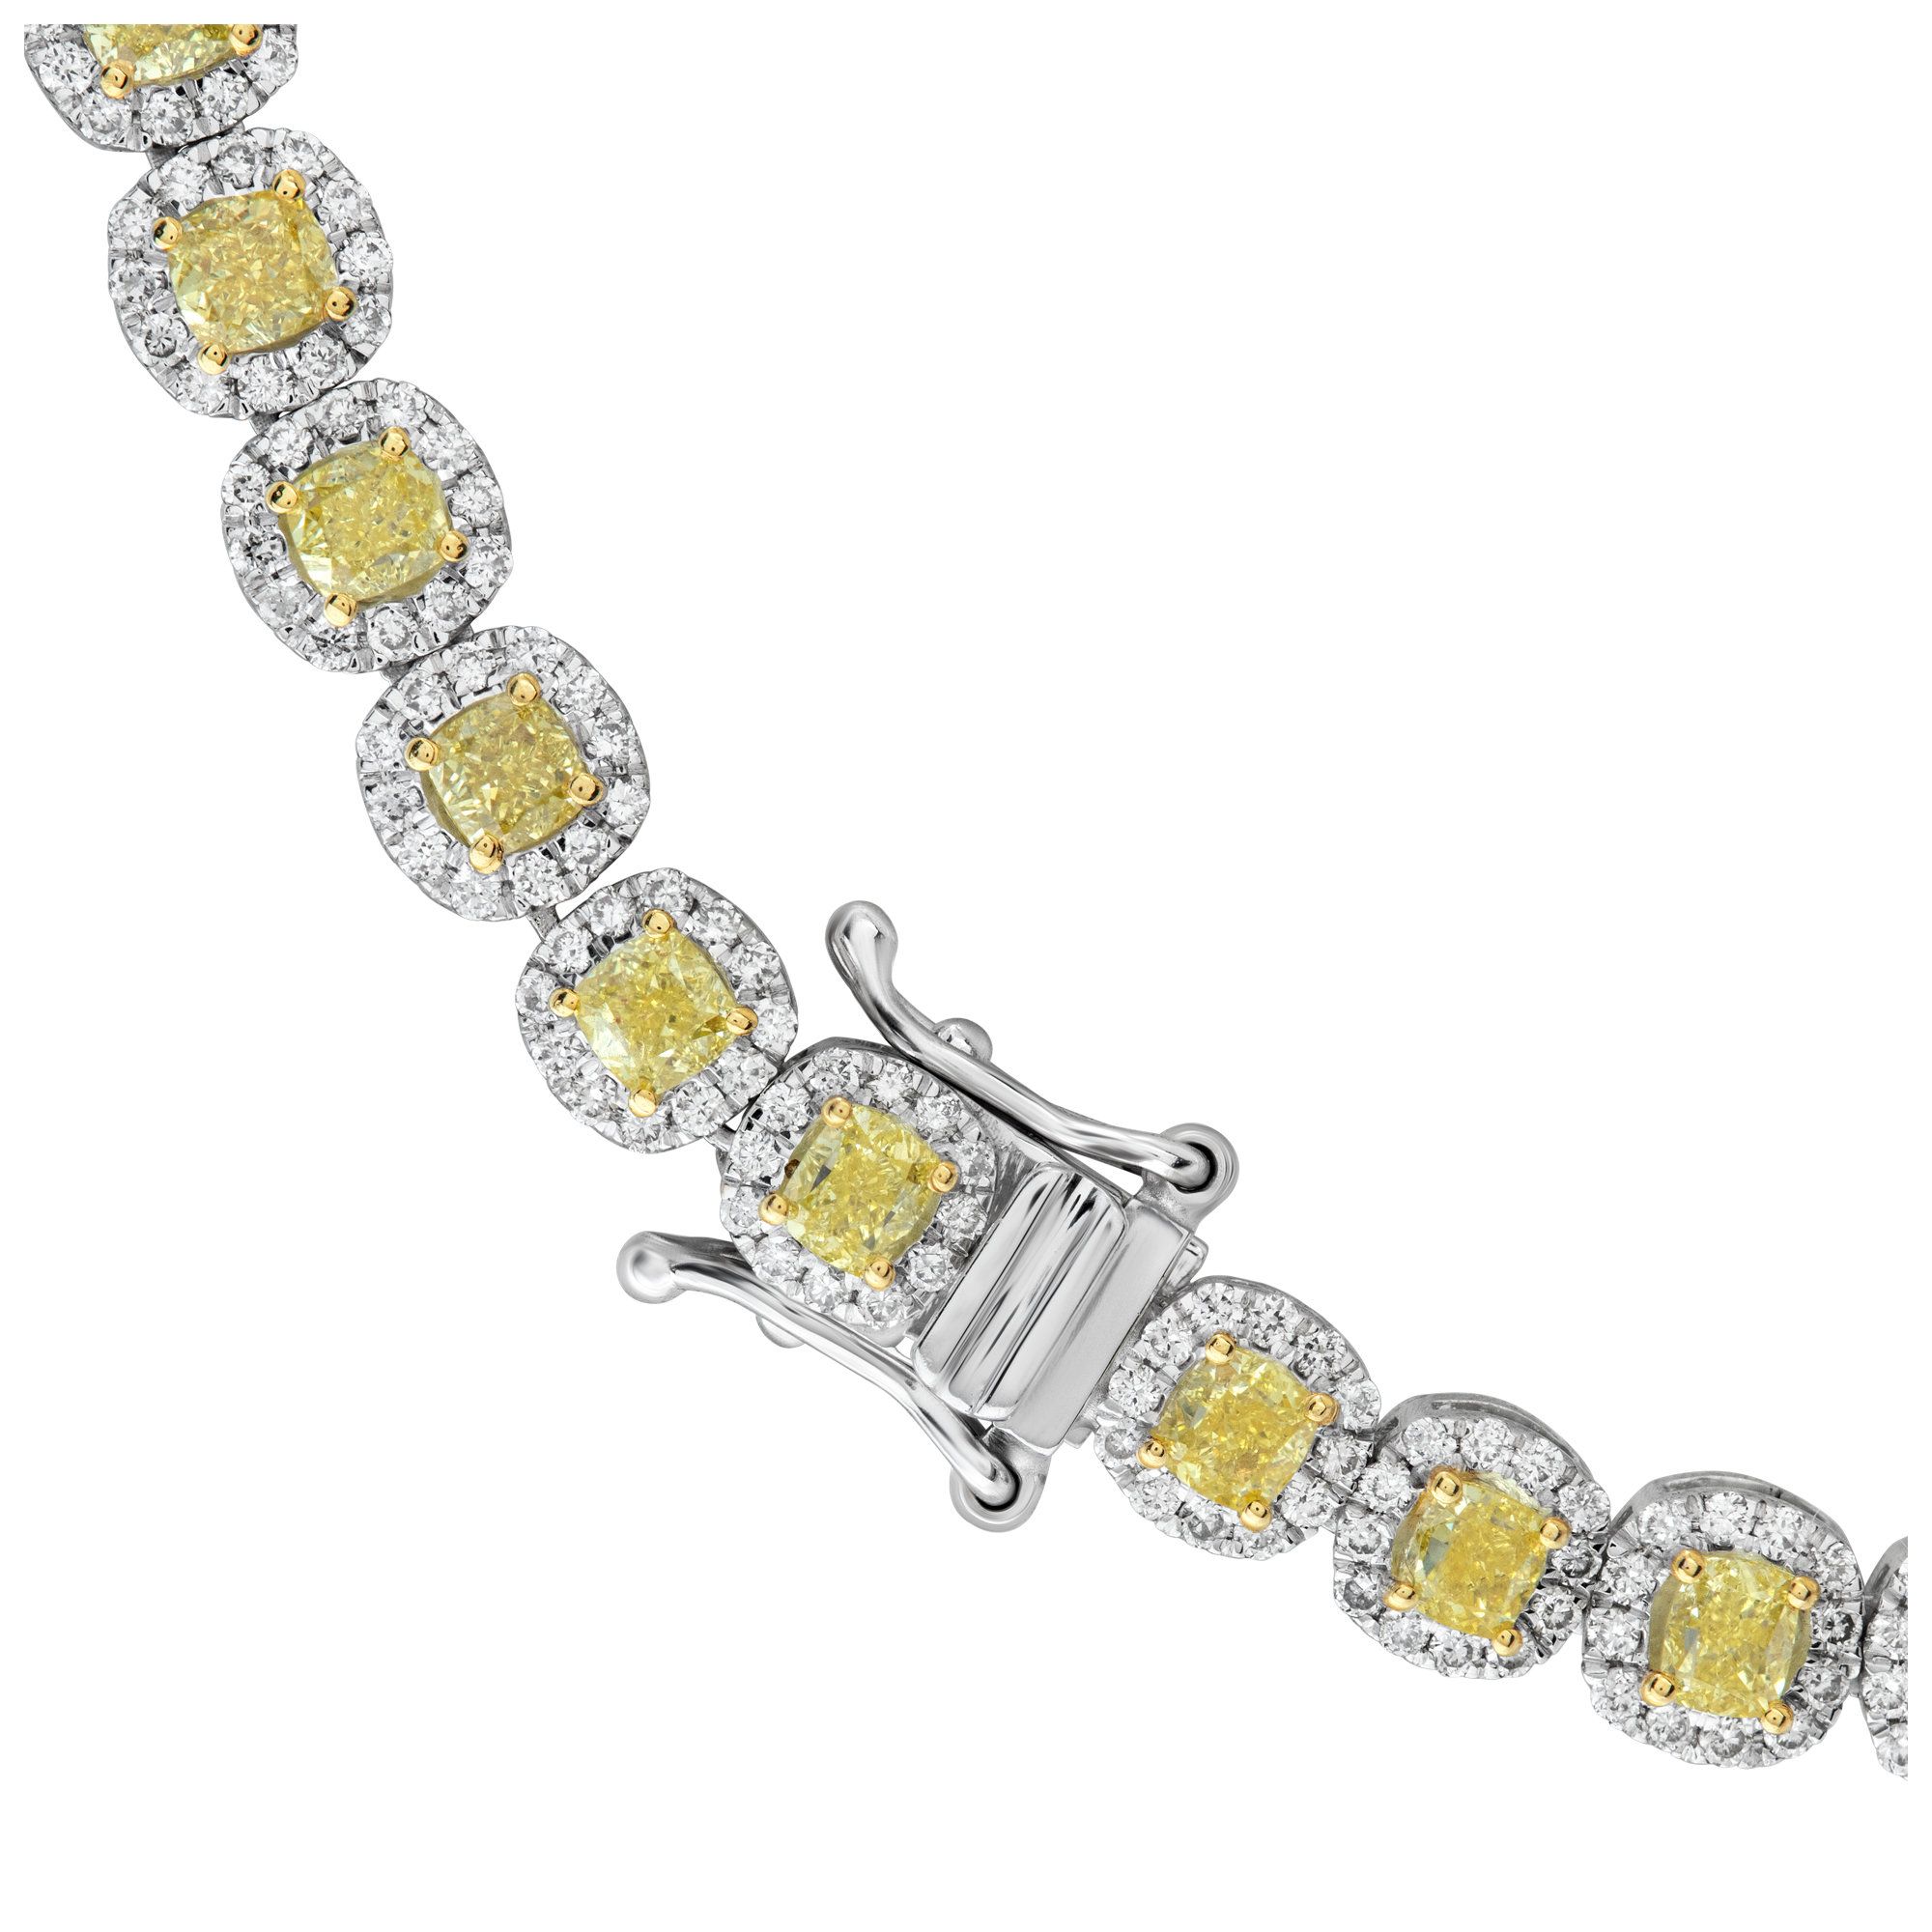 Riviera diamond necklace with GIA certified fancy intense yellow & white diamonds Total approximate weight: 19.07 carats set in 18K yellow & white gold